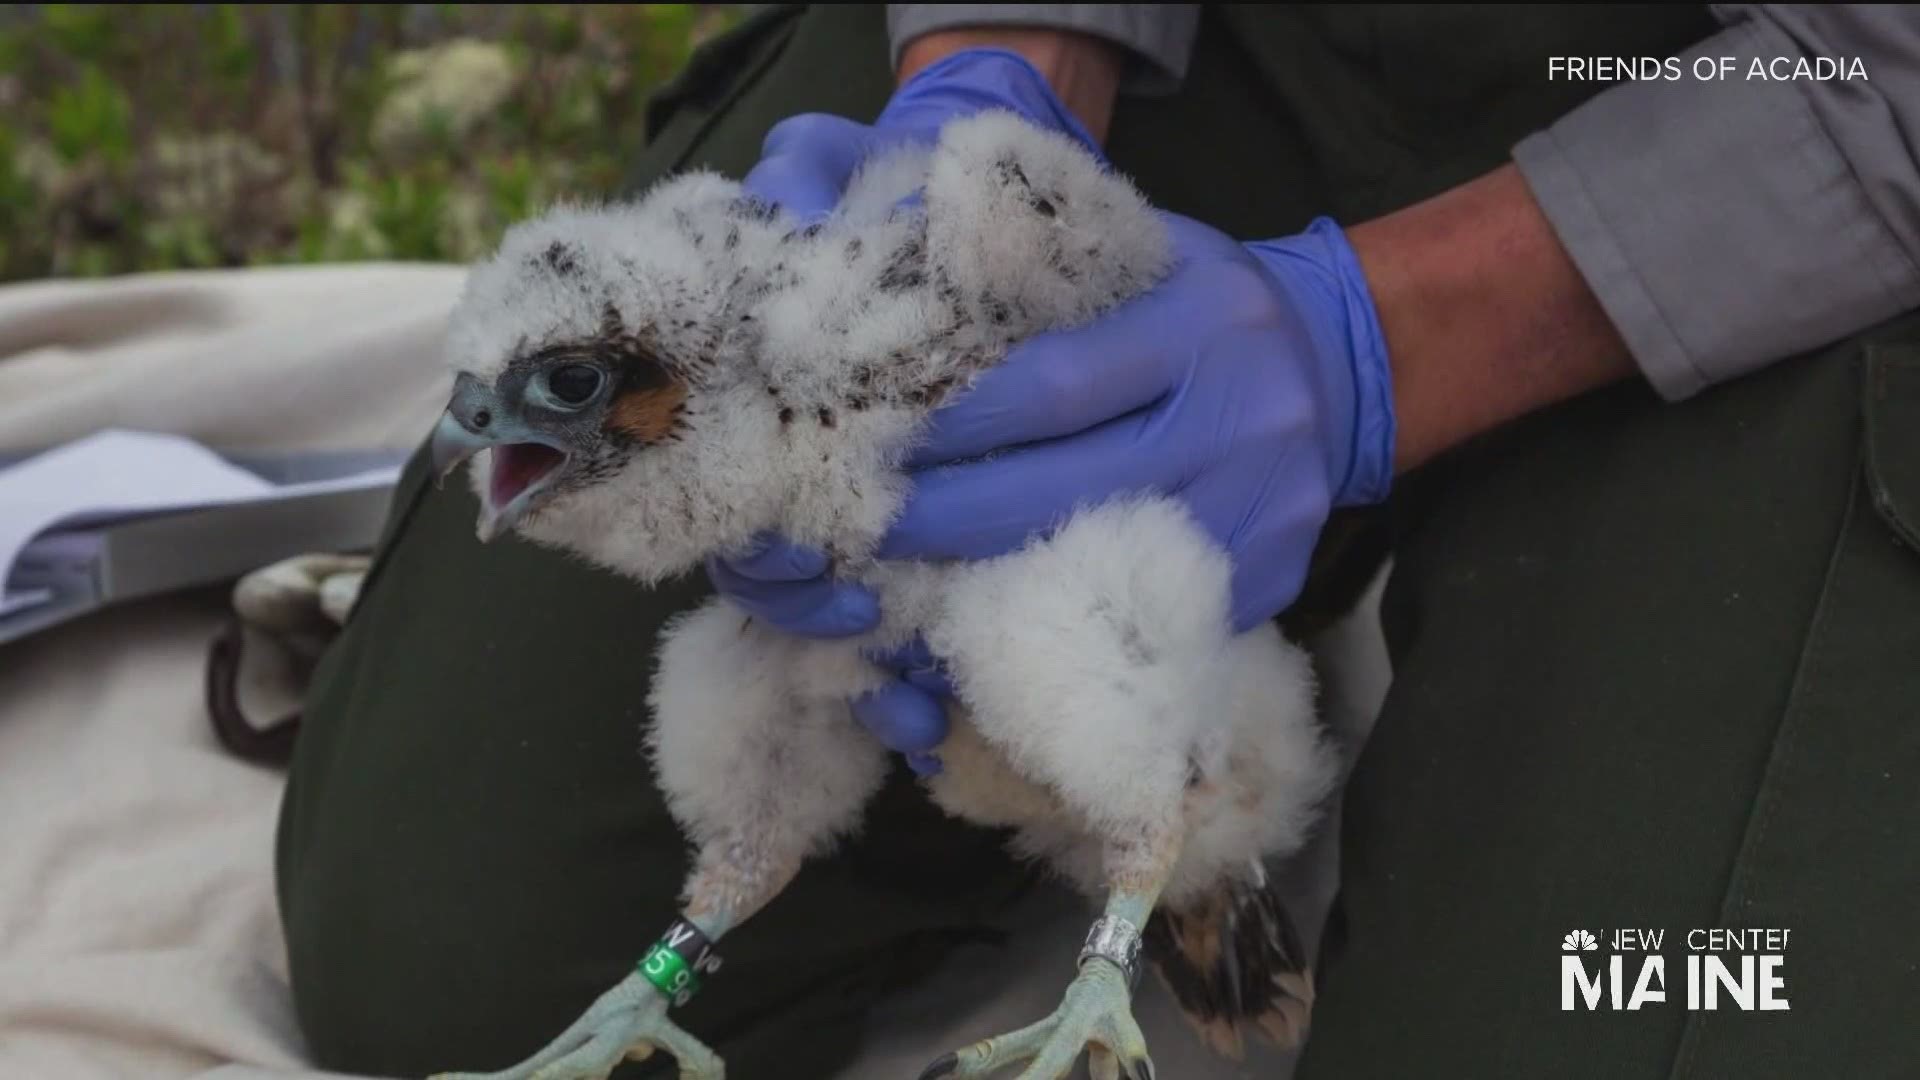 DDT almost wiped out peregrine falcons from the in by the 1960s but now the species is soaring.